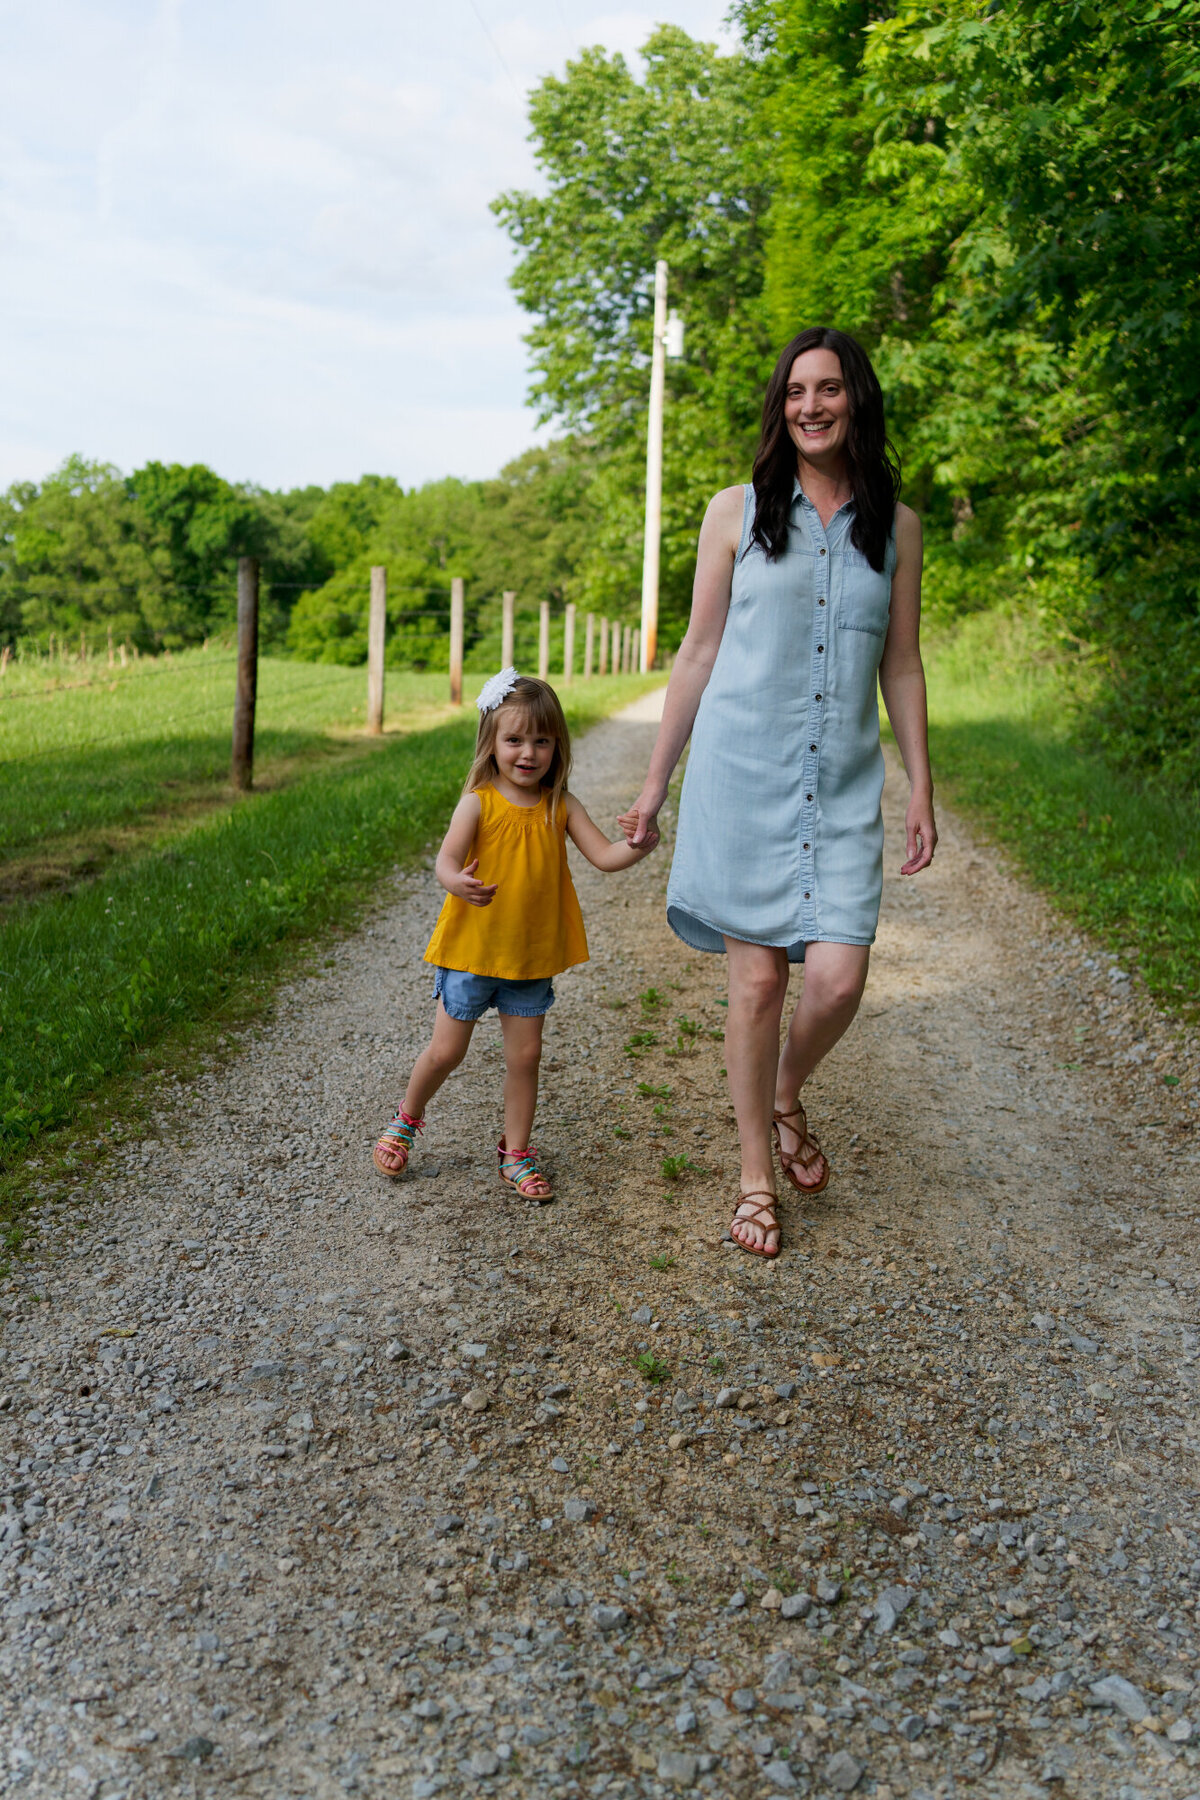 girl and mom walking on gravel road outdoor daytime portrait